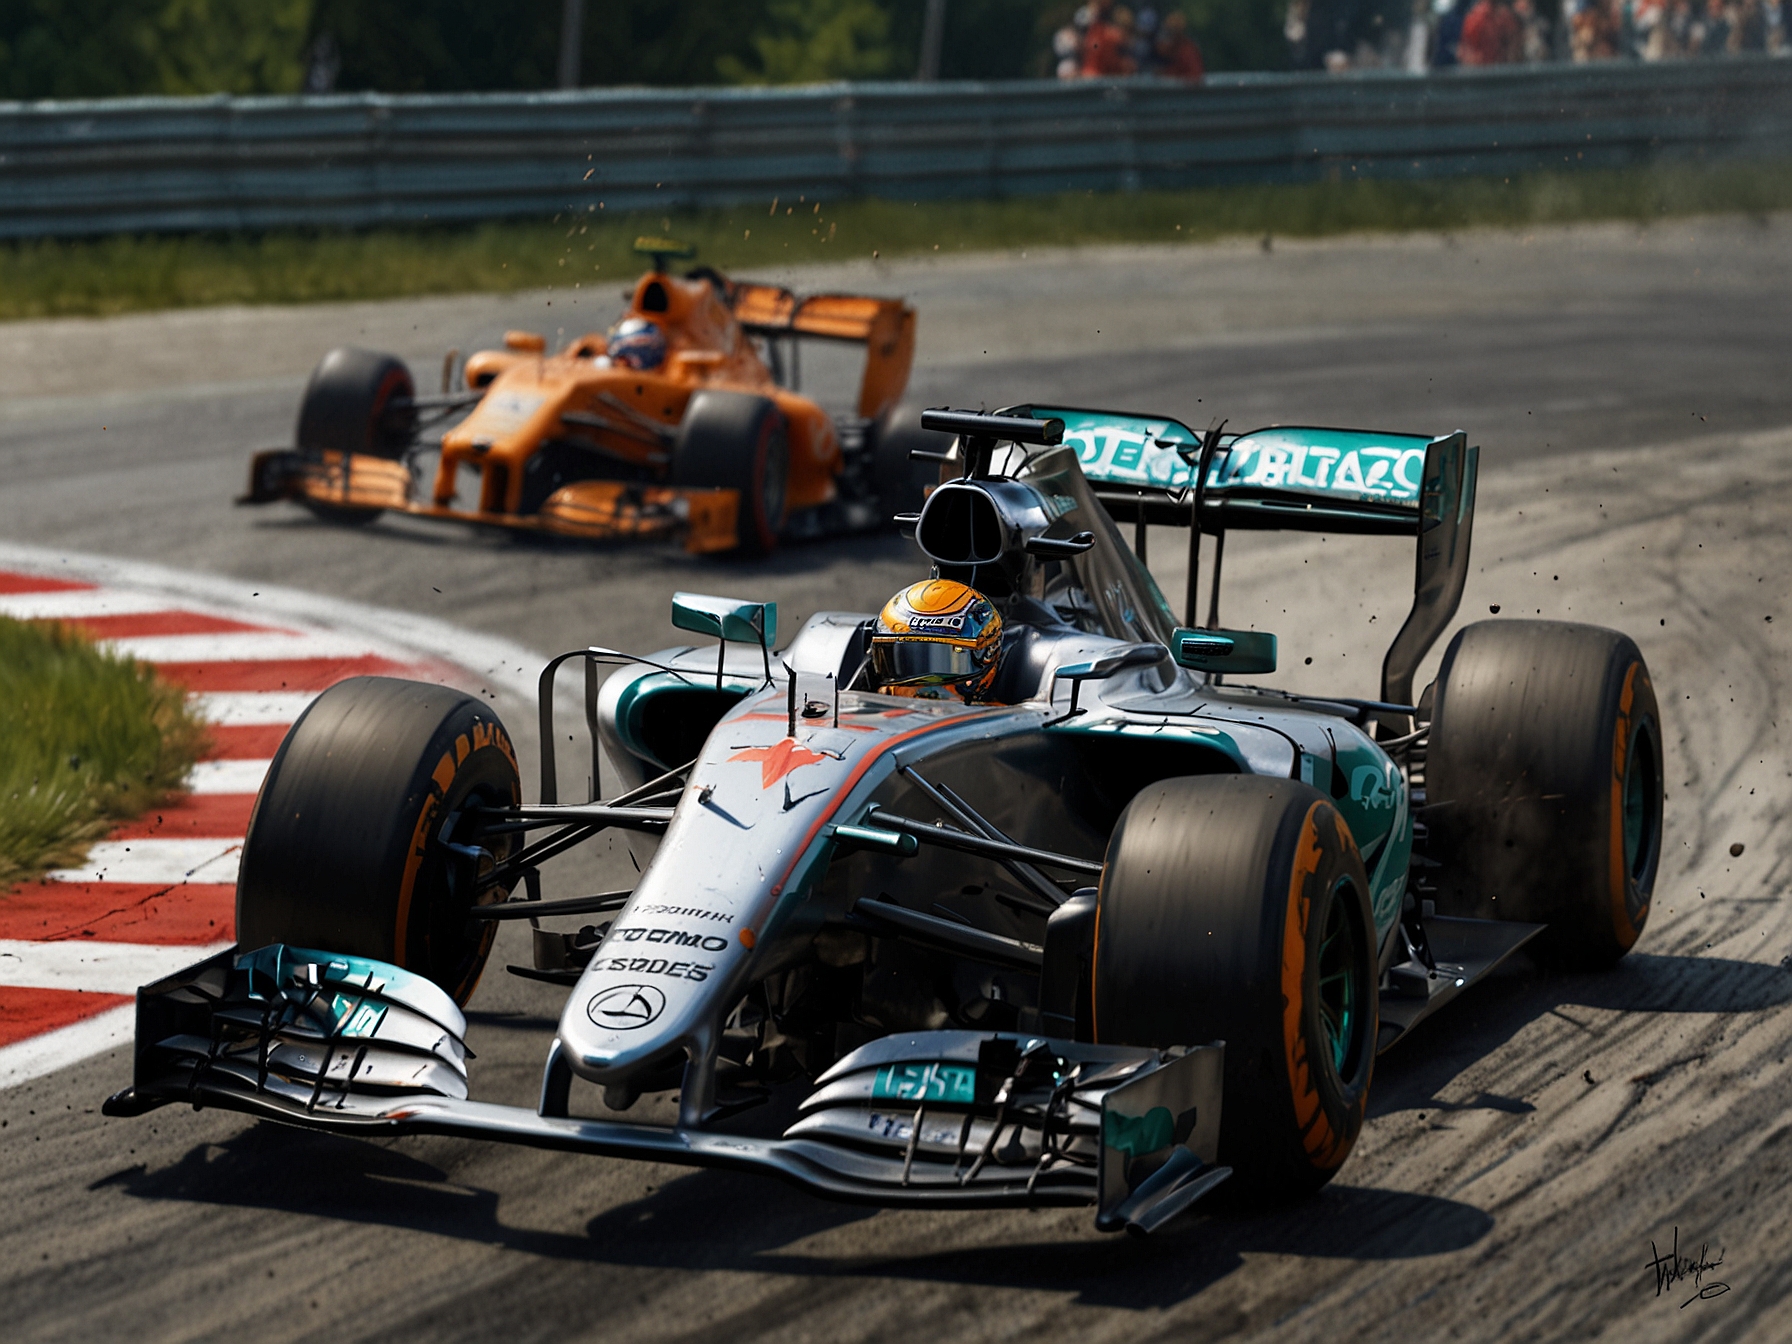 A tense moment during the Canadian Grand Prix, showcasing the tight competition between Hamilton and other top drivers, highlighting the high-stakes environment of F1.